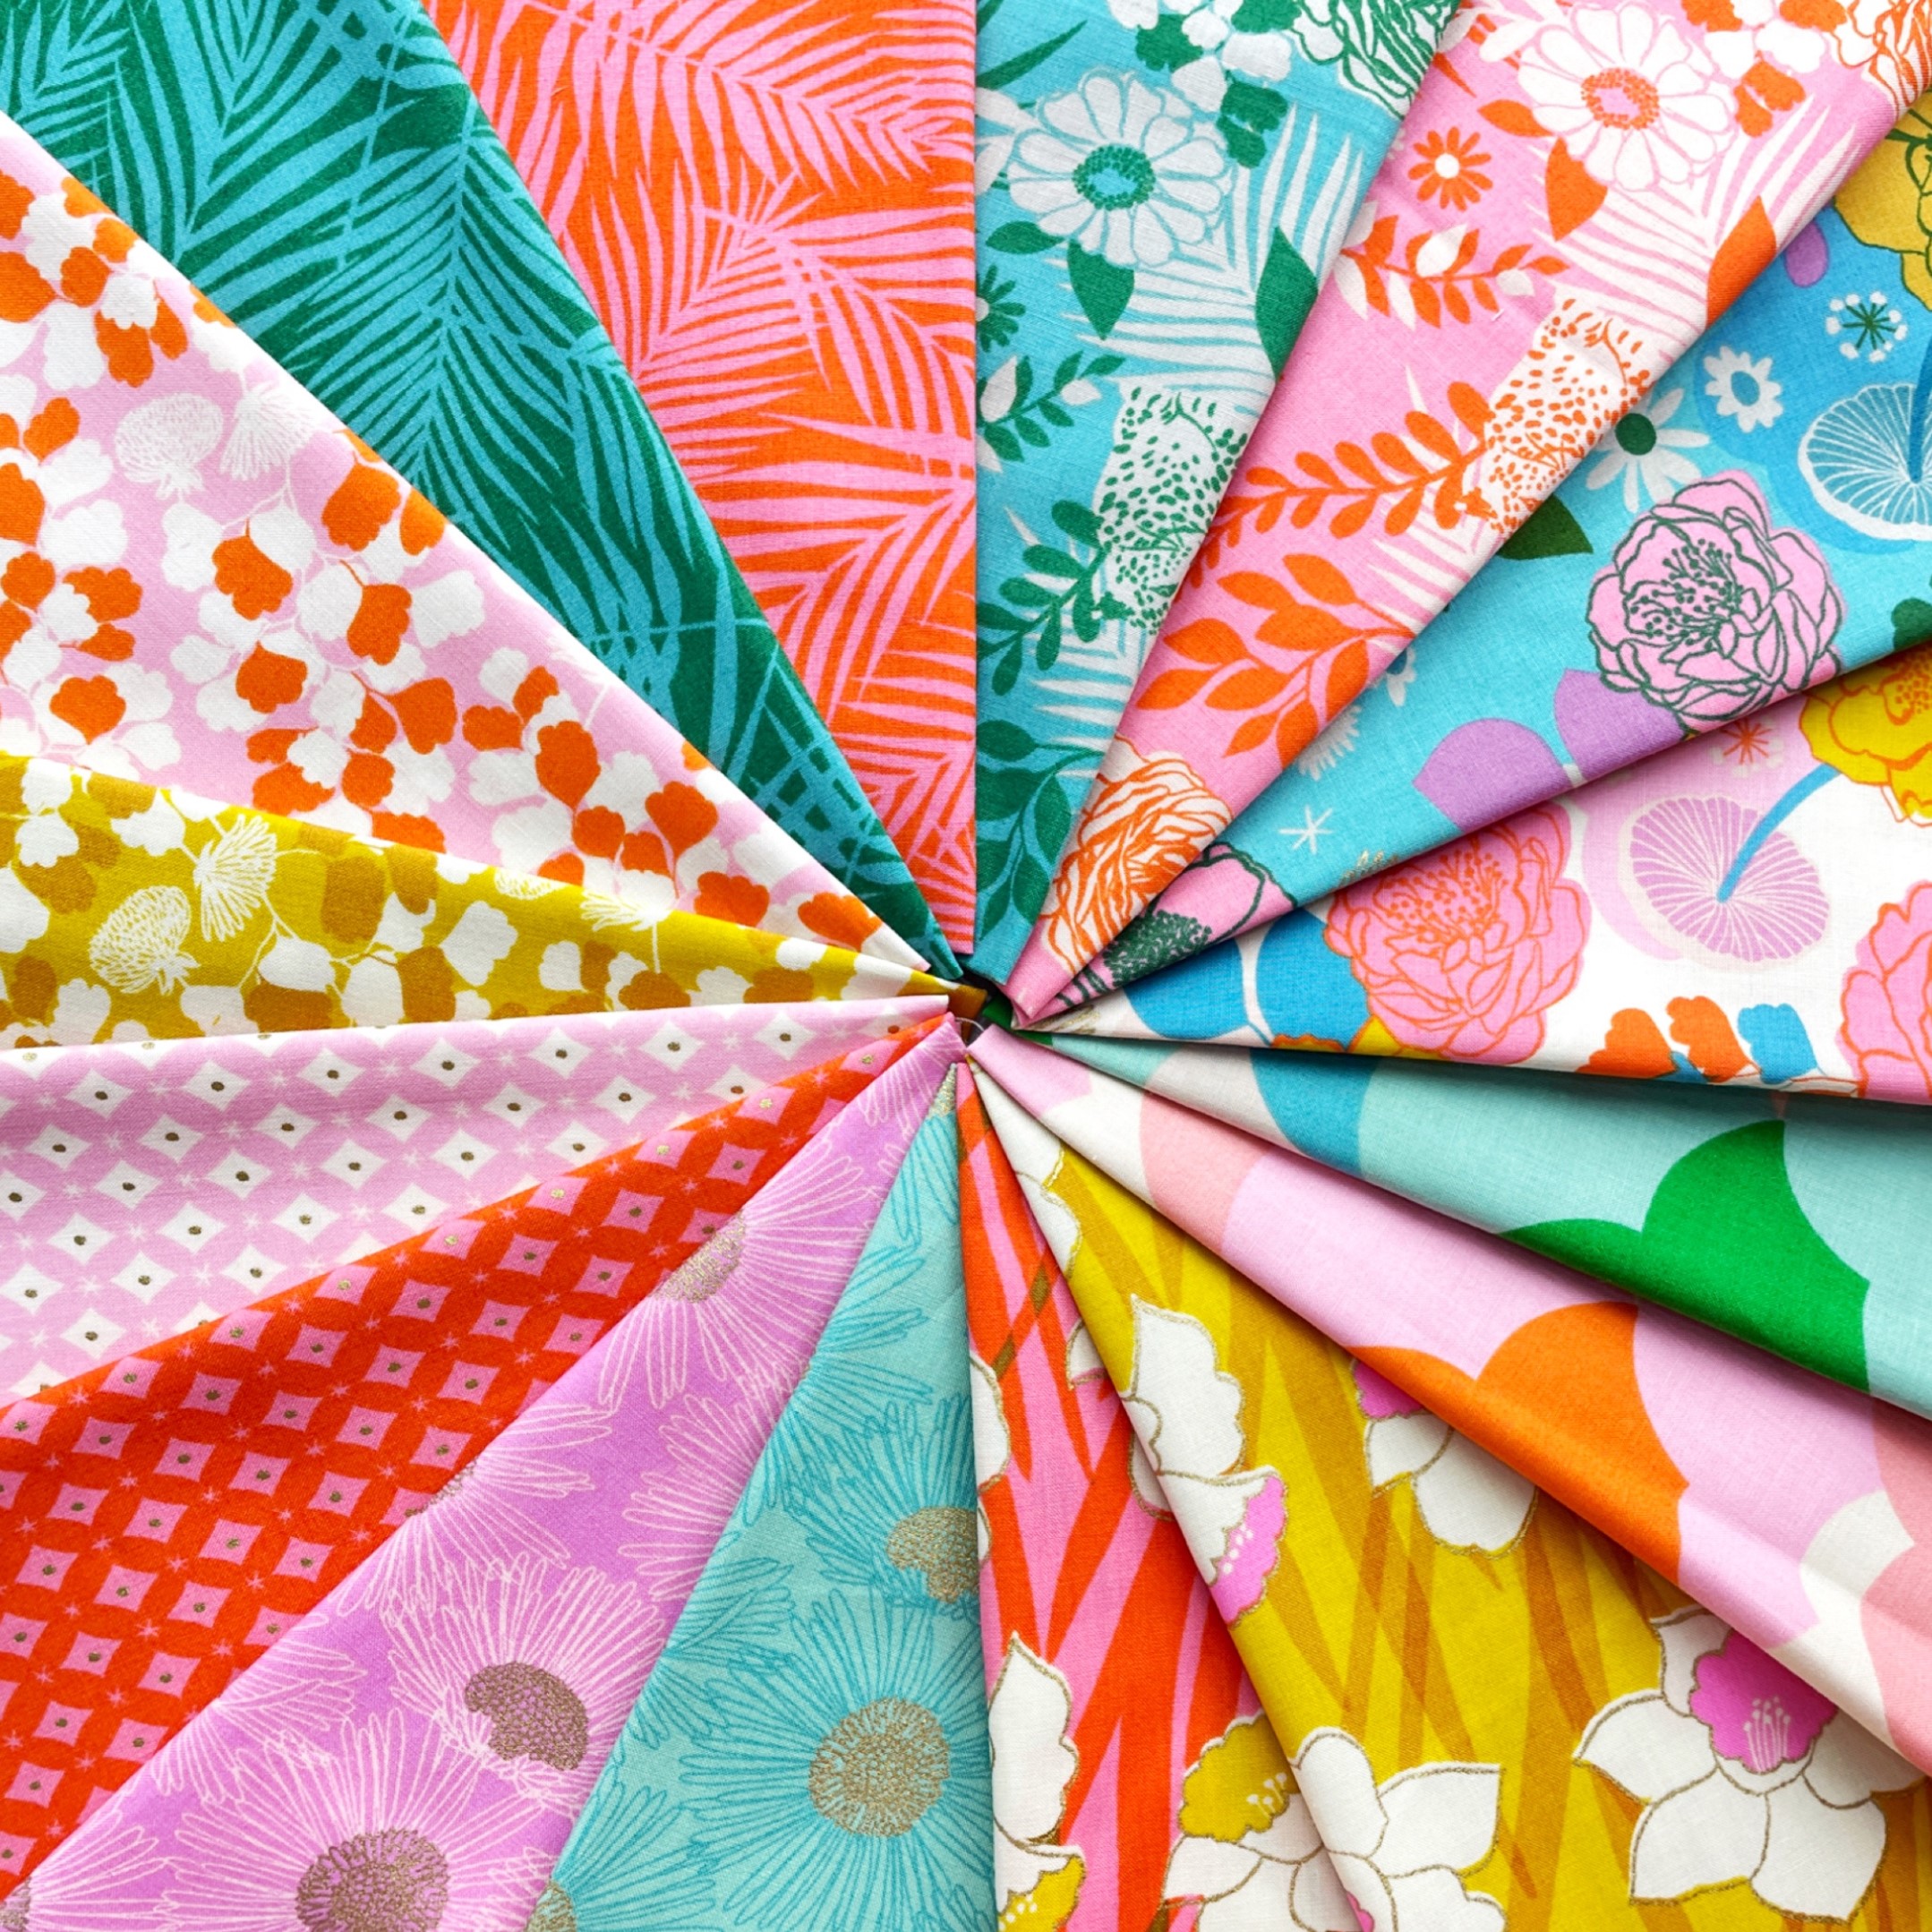 Best Places to Buy Quilting Fabric Online - Trusted Recommendations